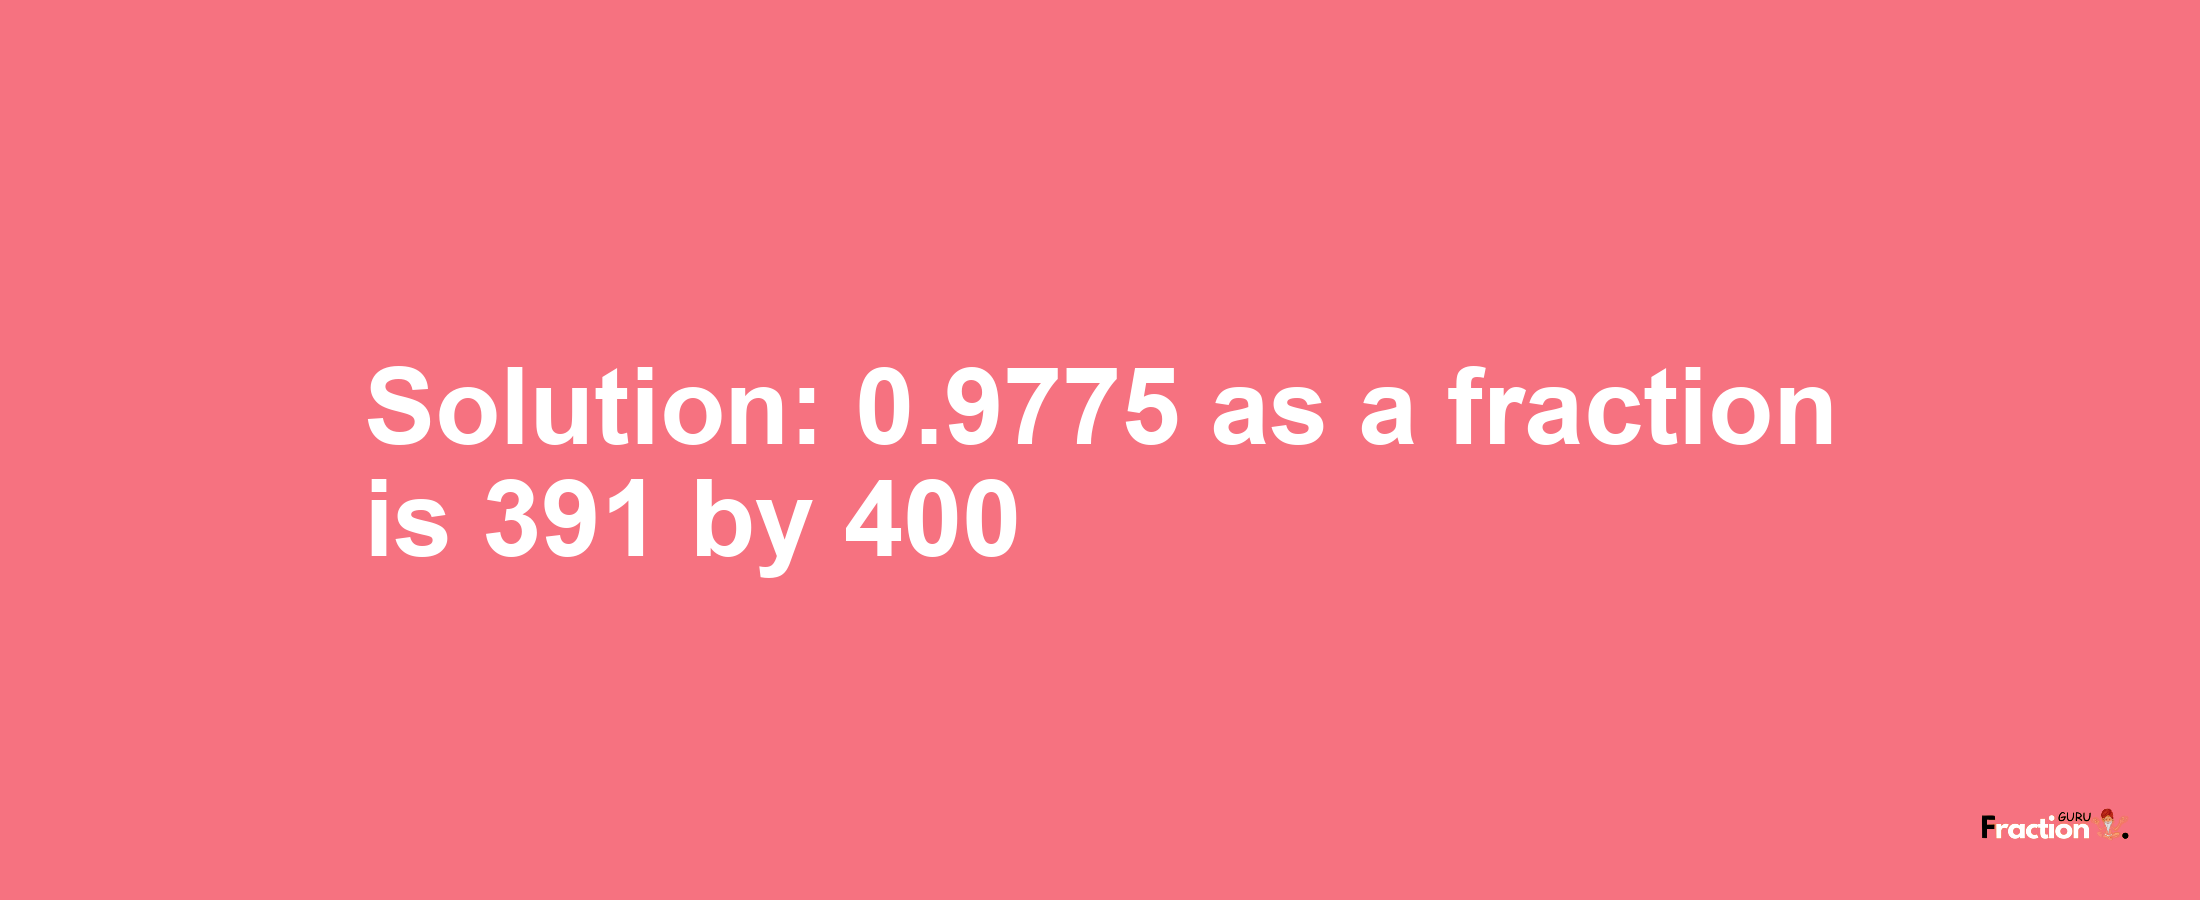 Solution:0.9775 as a fraction is 391/400